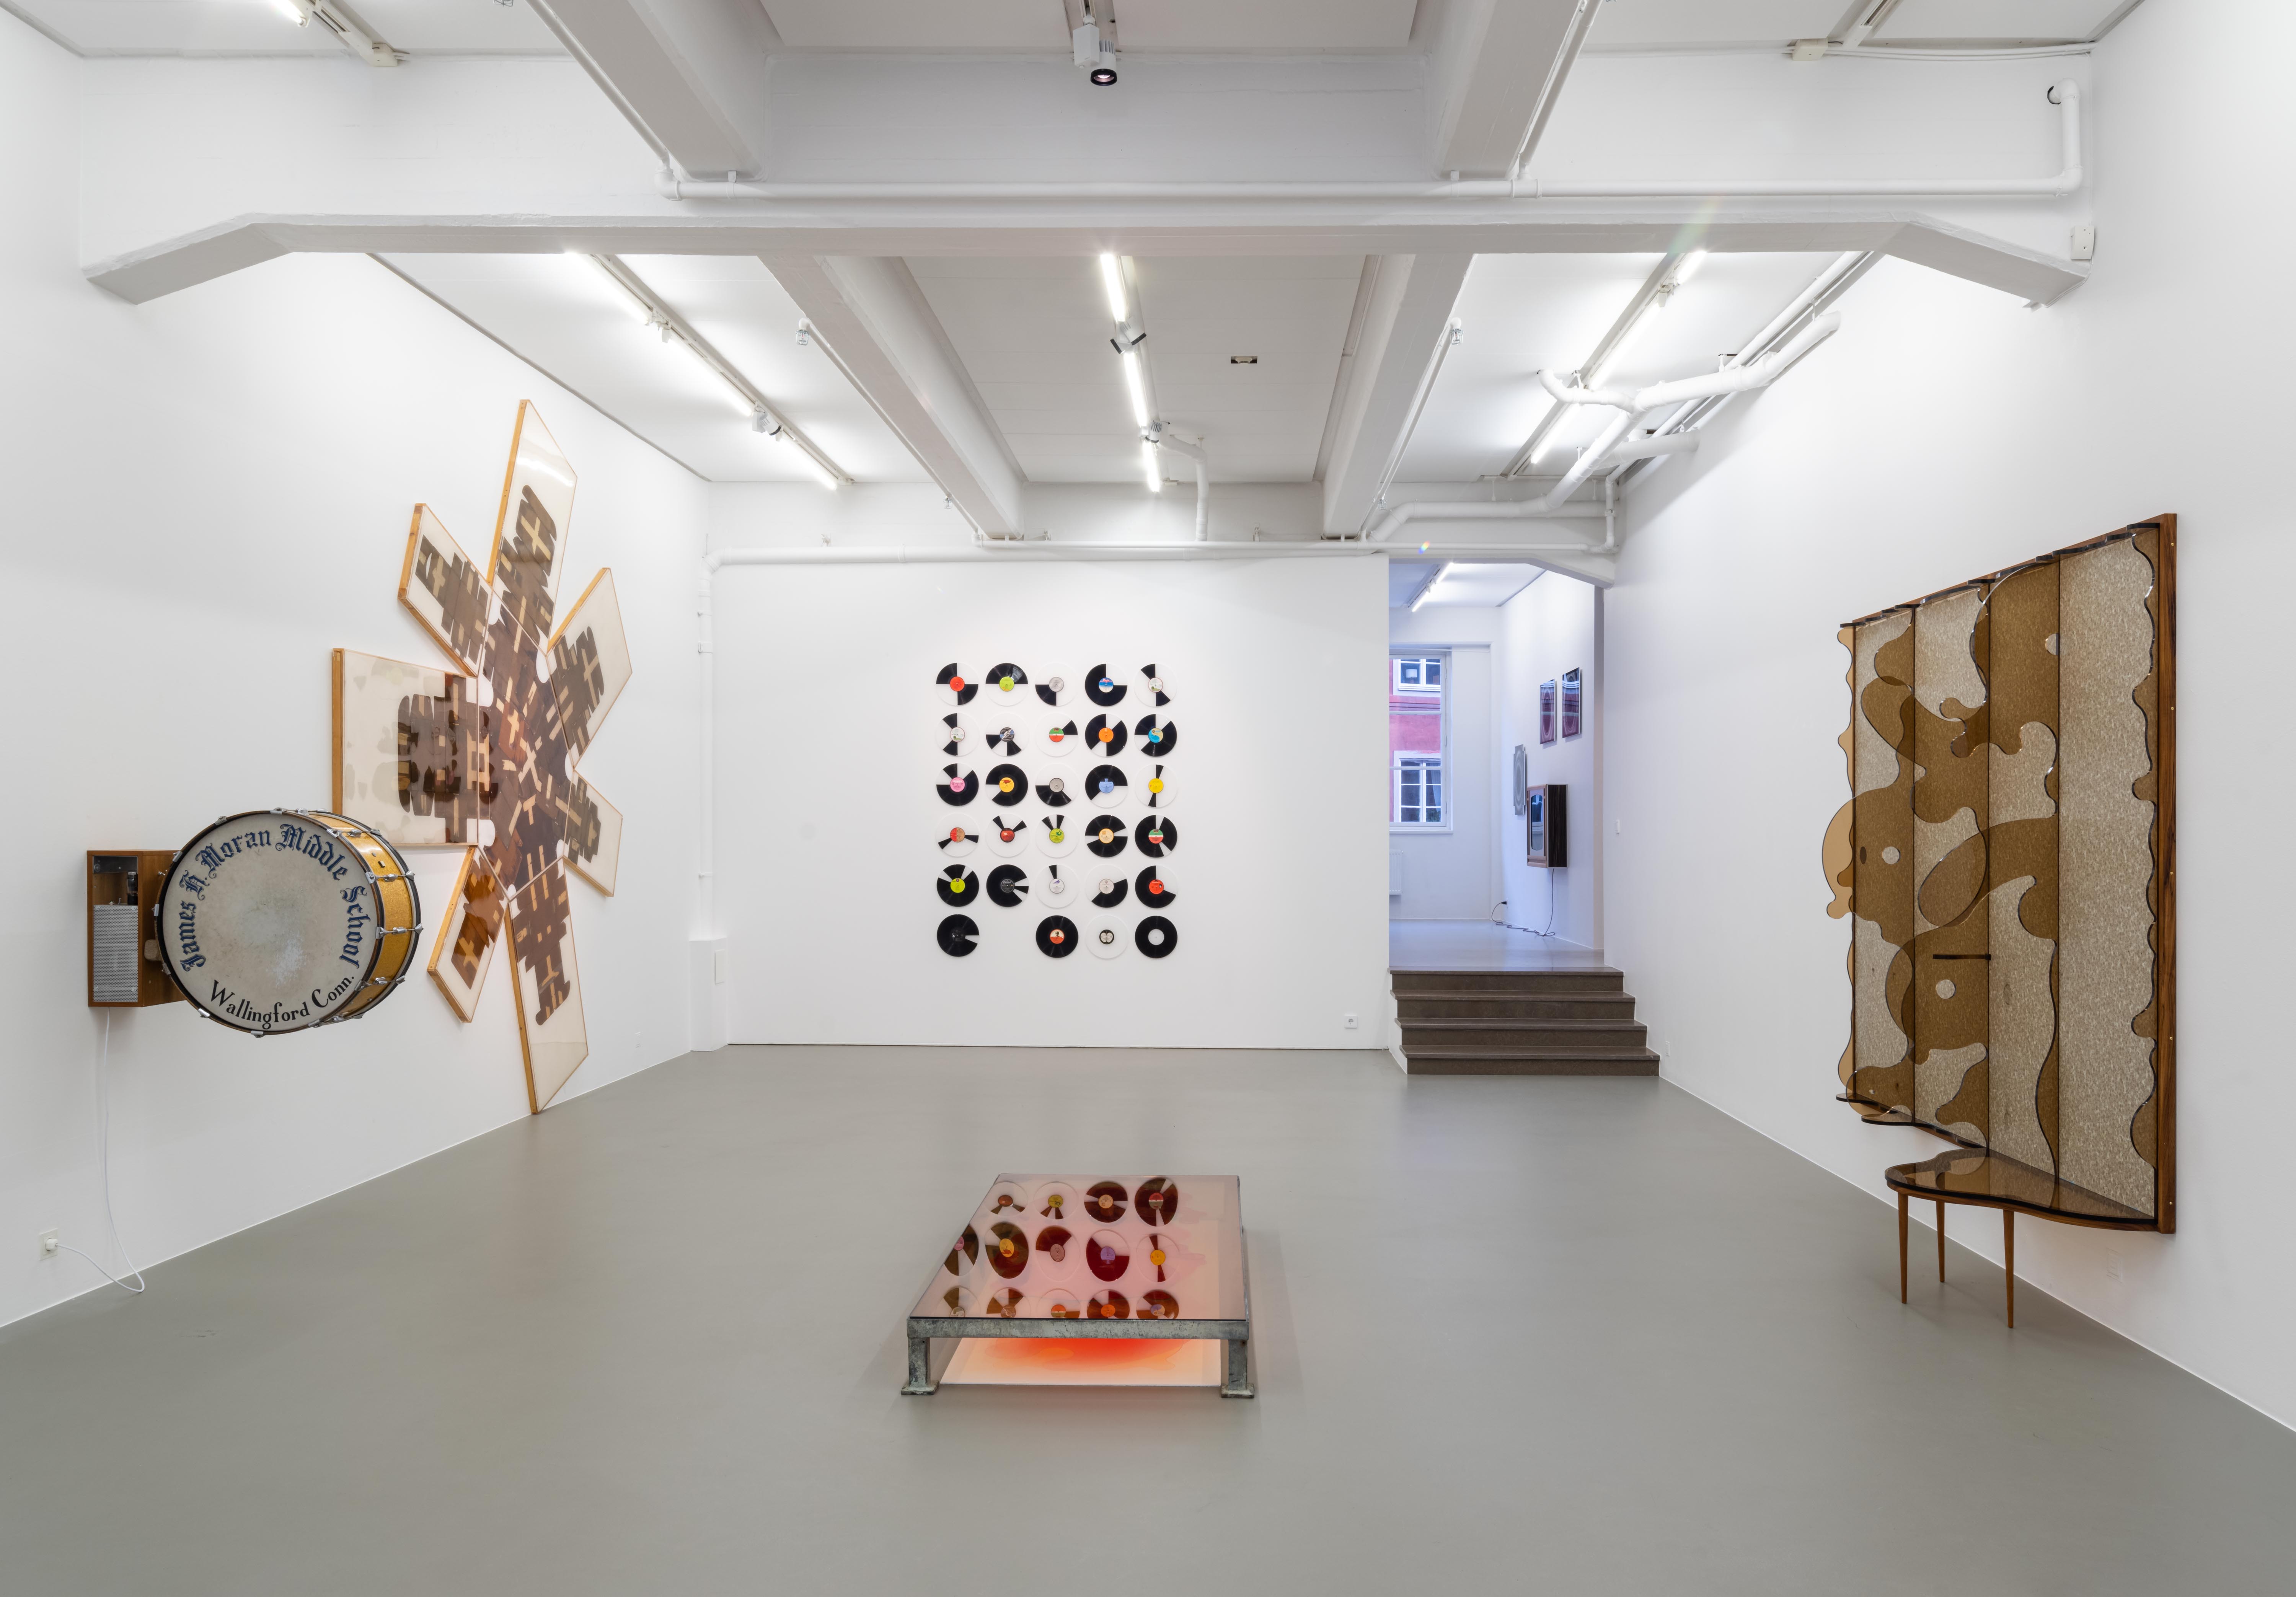 Clay Ketter, "...out of my hands.", 2019, installation view. Photo: Jean-Baptiste Béranger